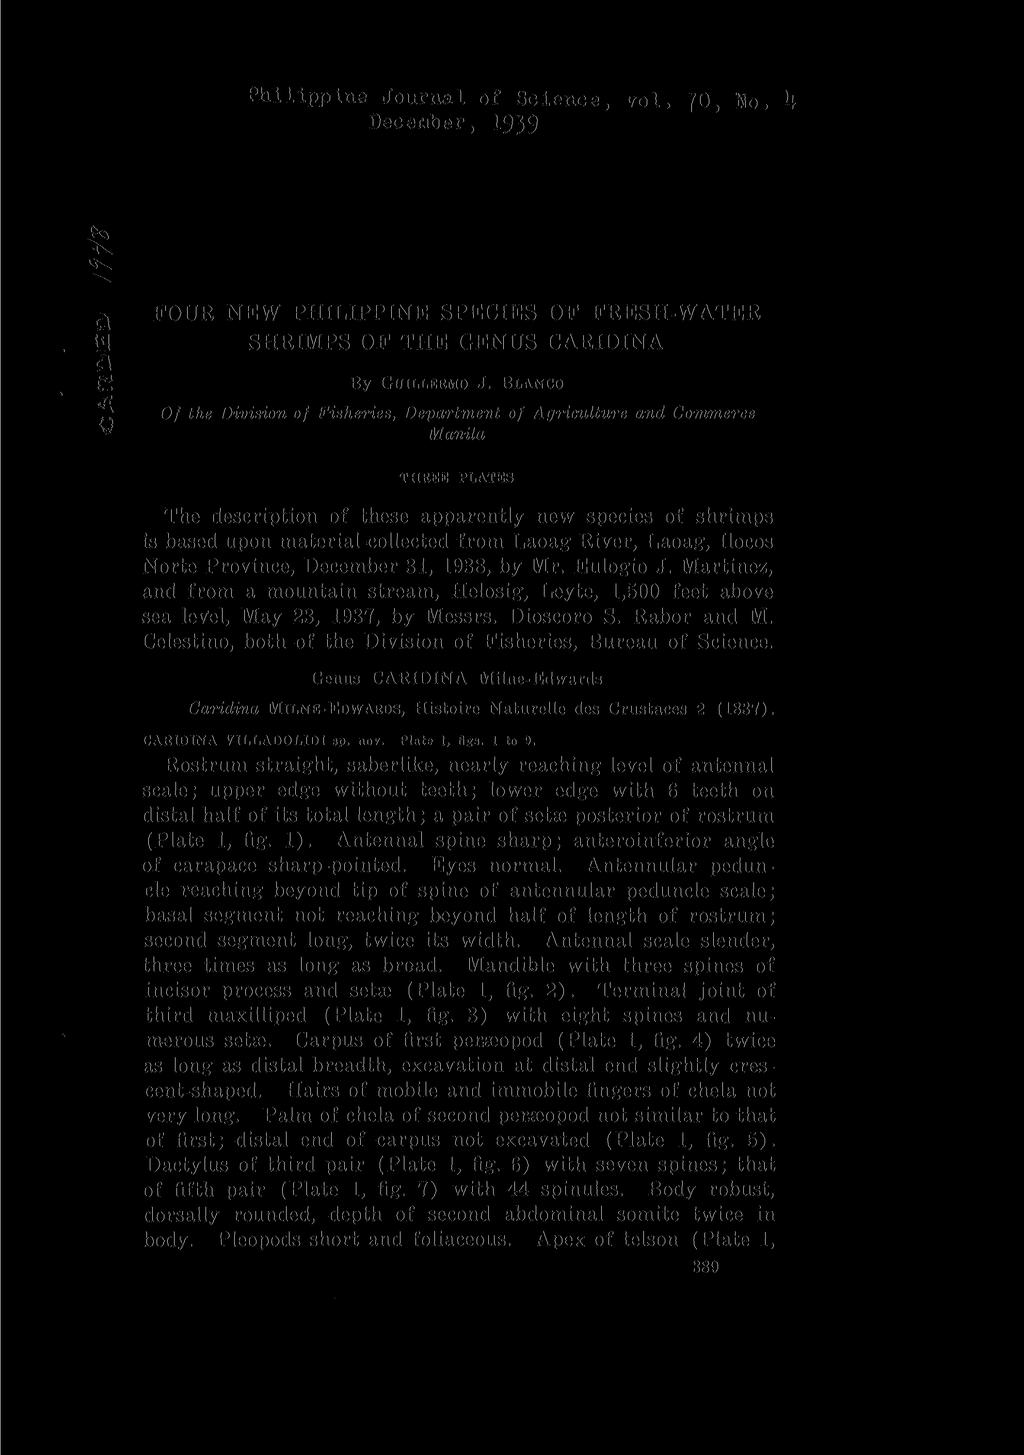 Philippine Journal of Science, vol. 70, Bo. k December, 1939 D Ui Q FOUR NEW PHILIPPINE SPECIES OF FRESH-WATER SHRIMPS OF THE GENUS CARIDINA By GUILLERMO J.